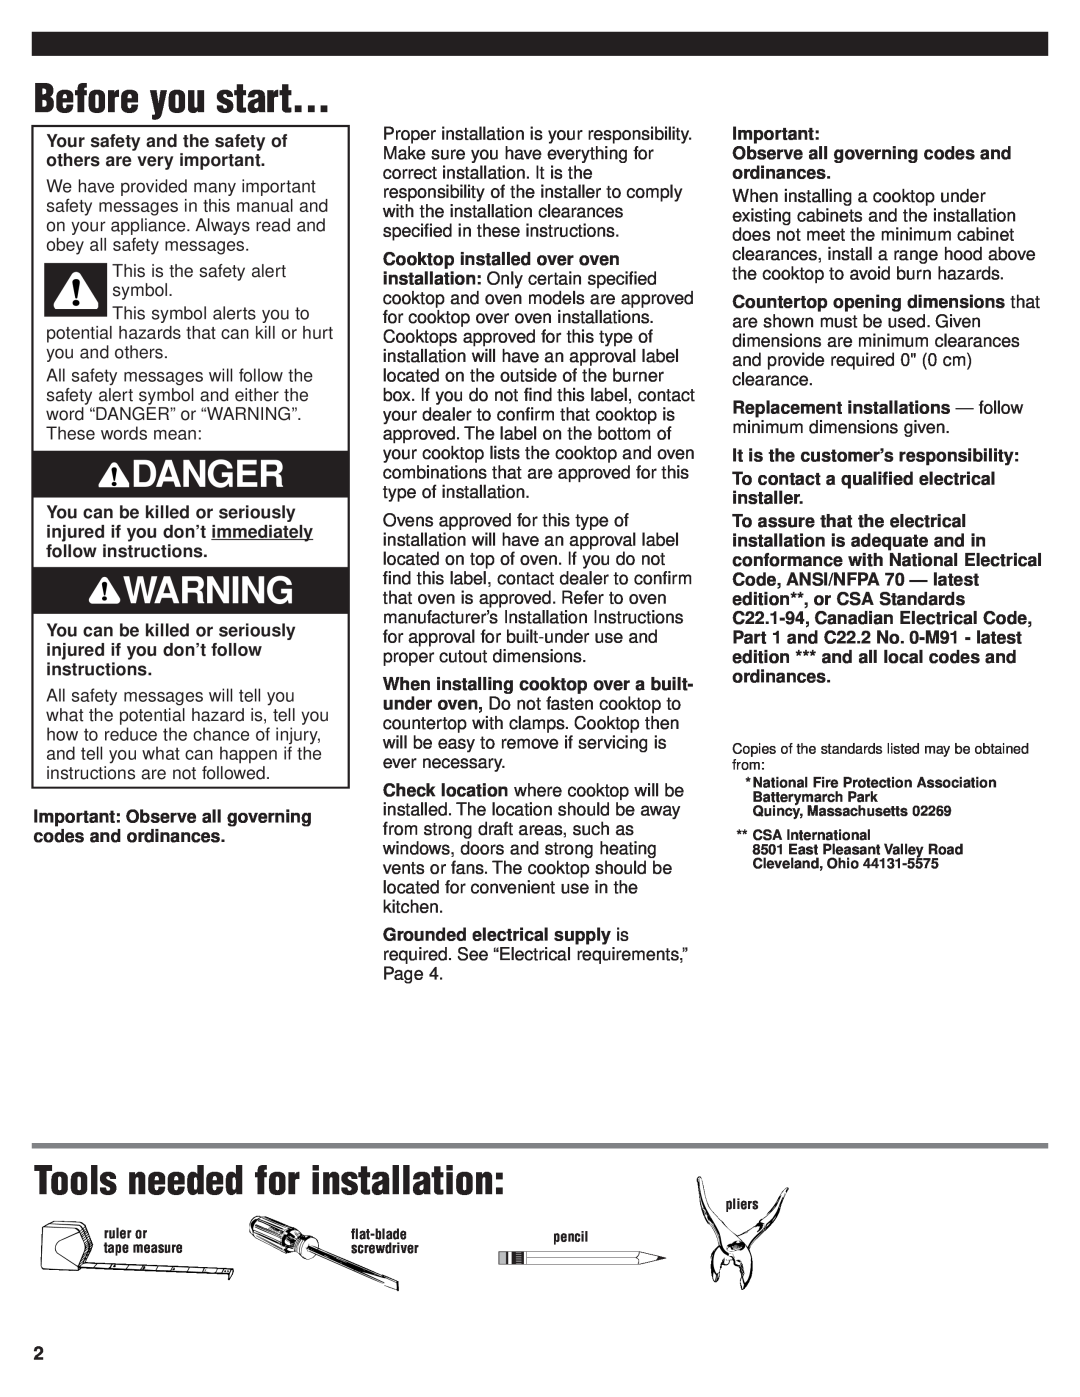 Whirlpool RCS2002GS1 installation instructions Before you start, Tools needed for installation, Danger 